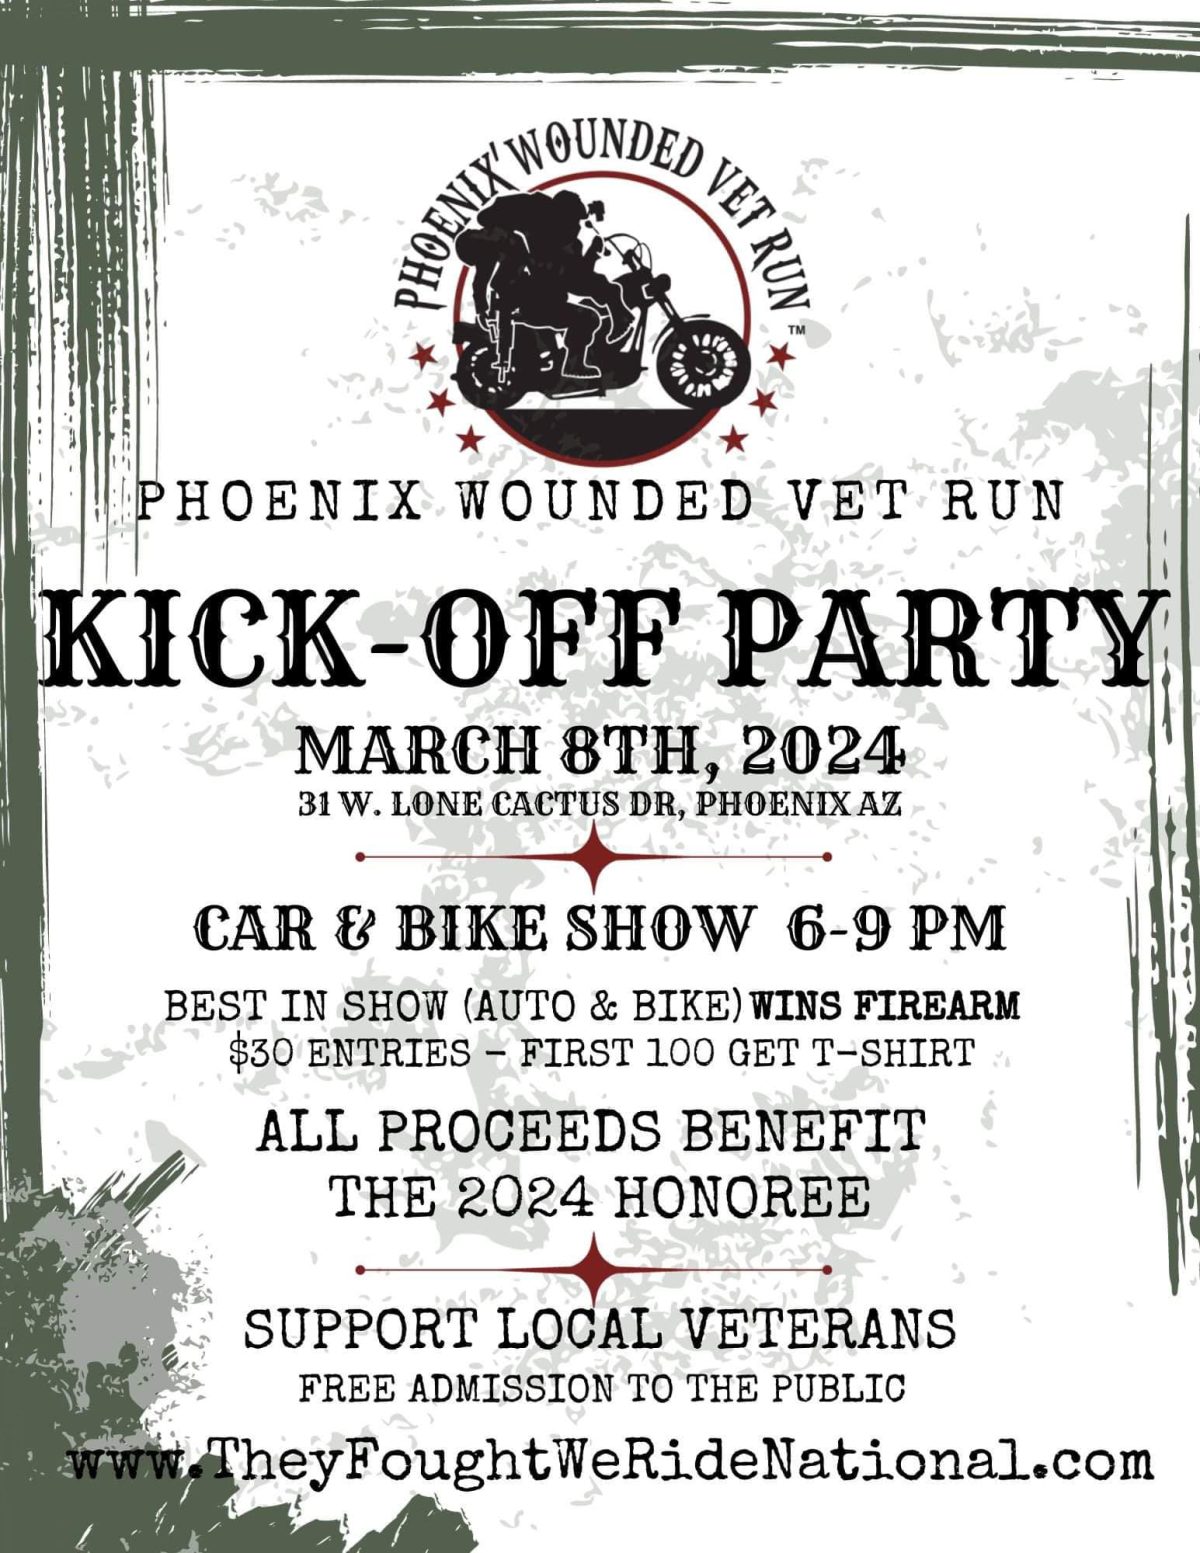 Phoenix Wounded Vet Run Kick-Off Party